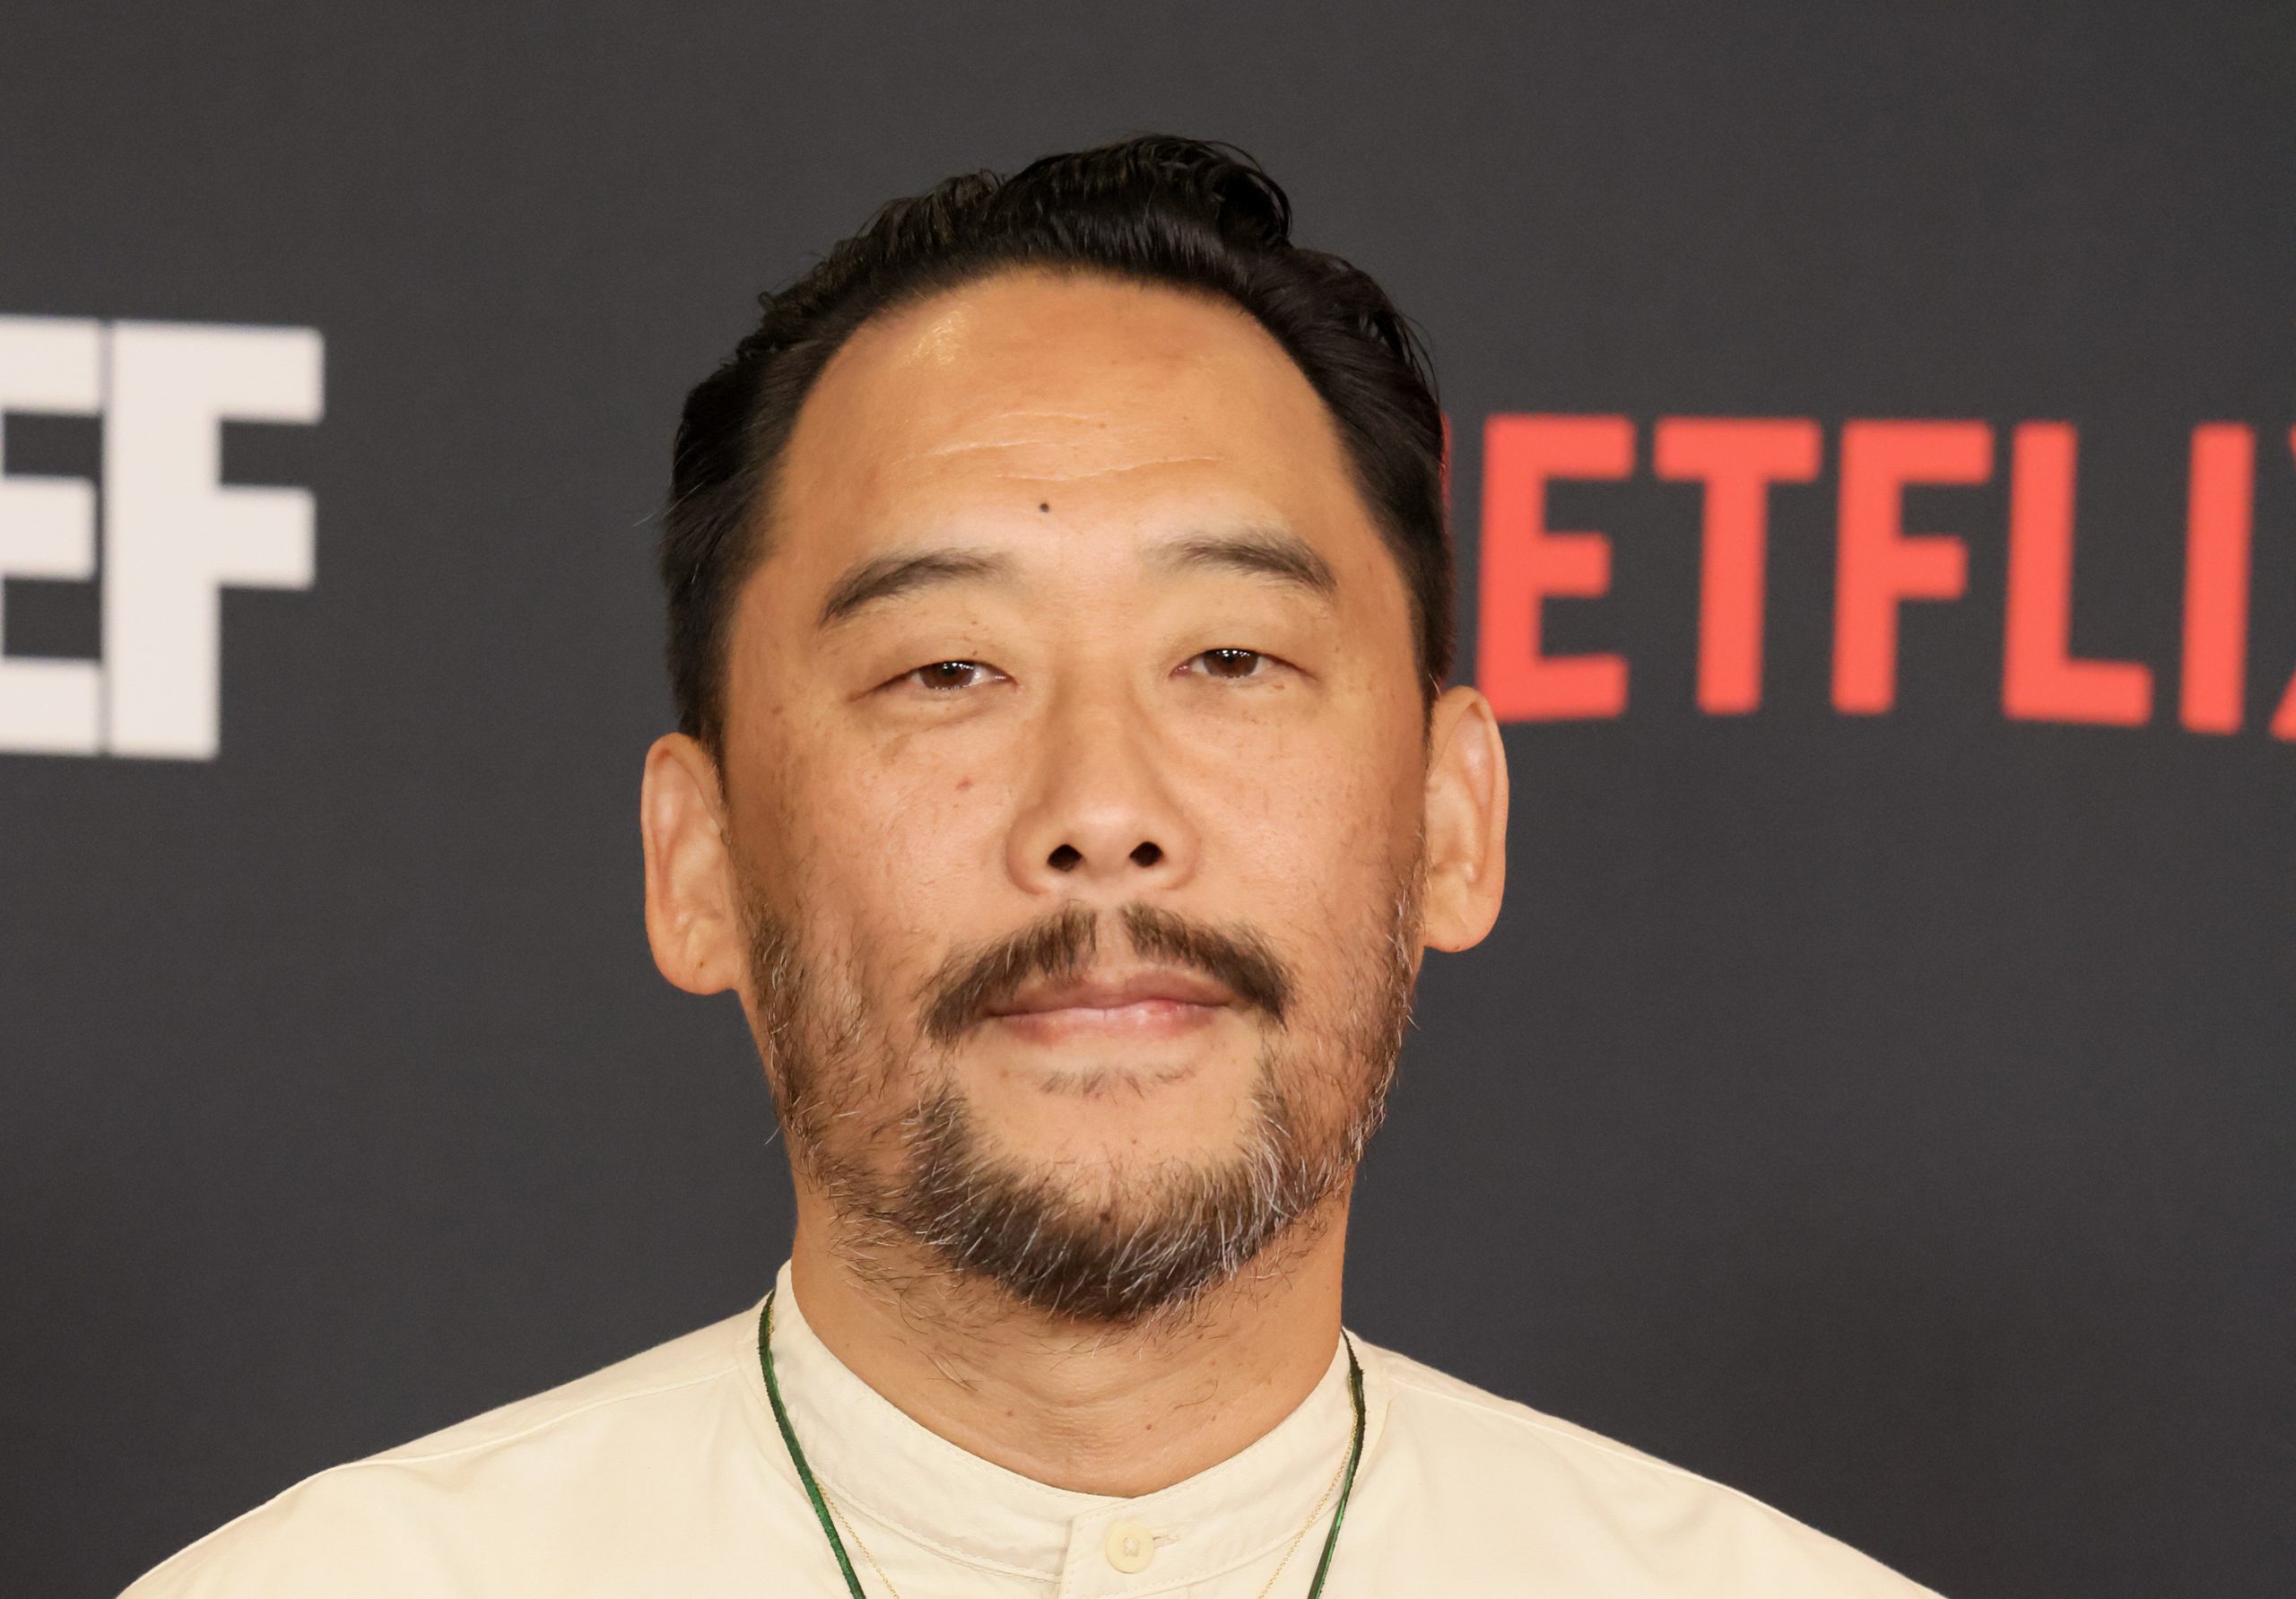 HOLLYWOOD, CALIFORNIA - MARCH 30: David Choe attends the Los Angeles premiere of Netflix's 